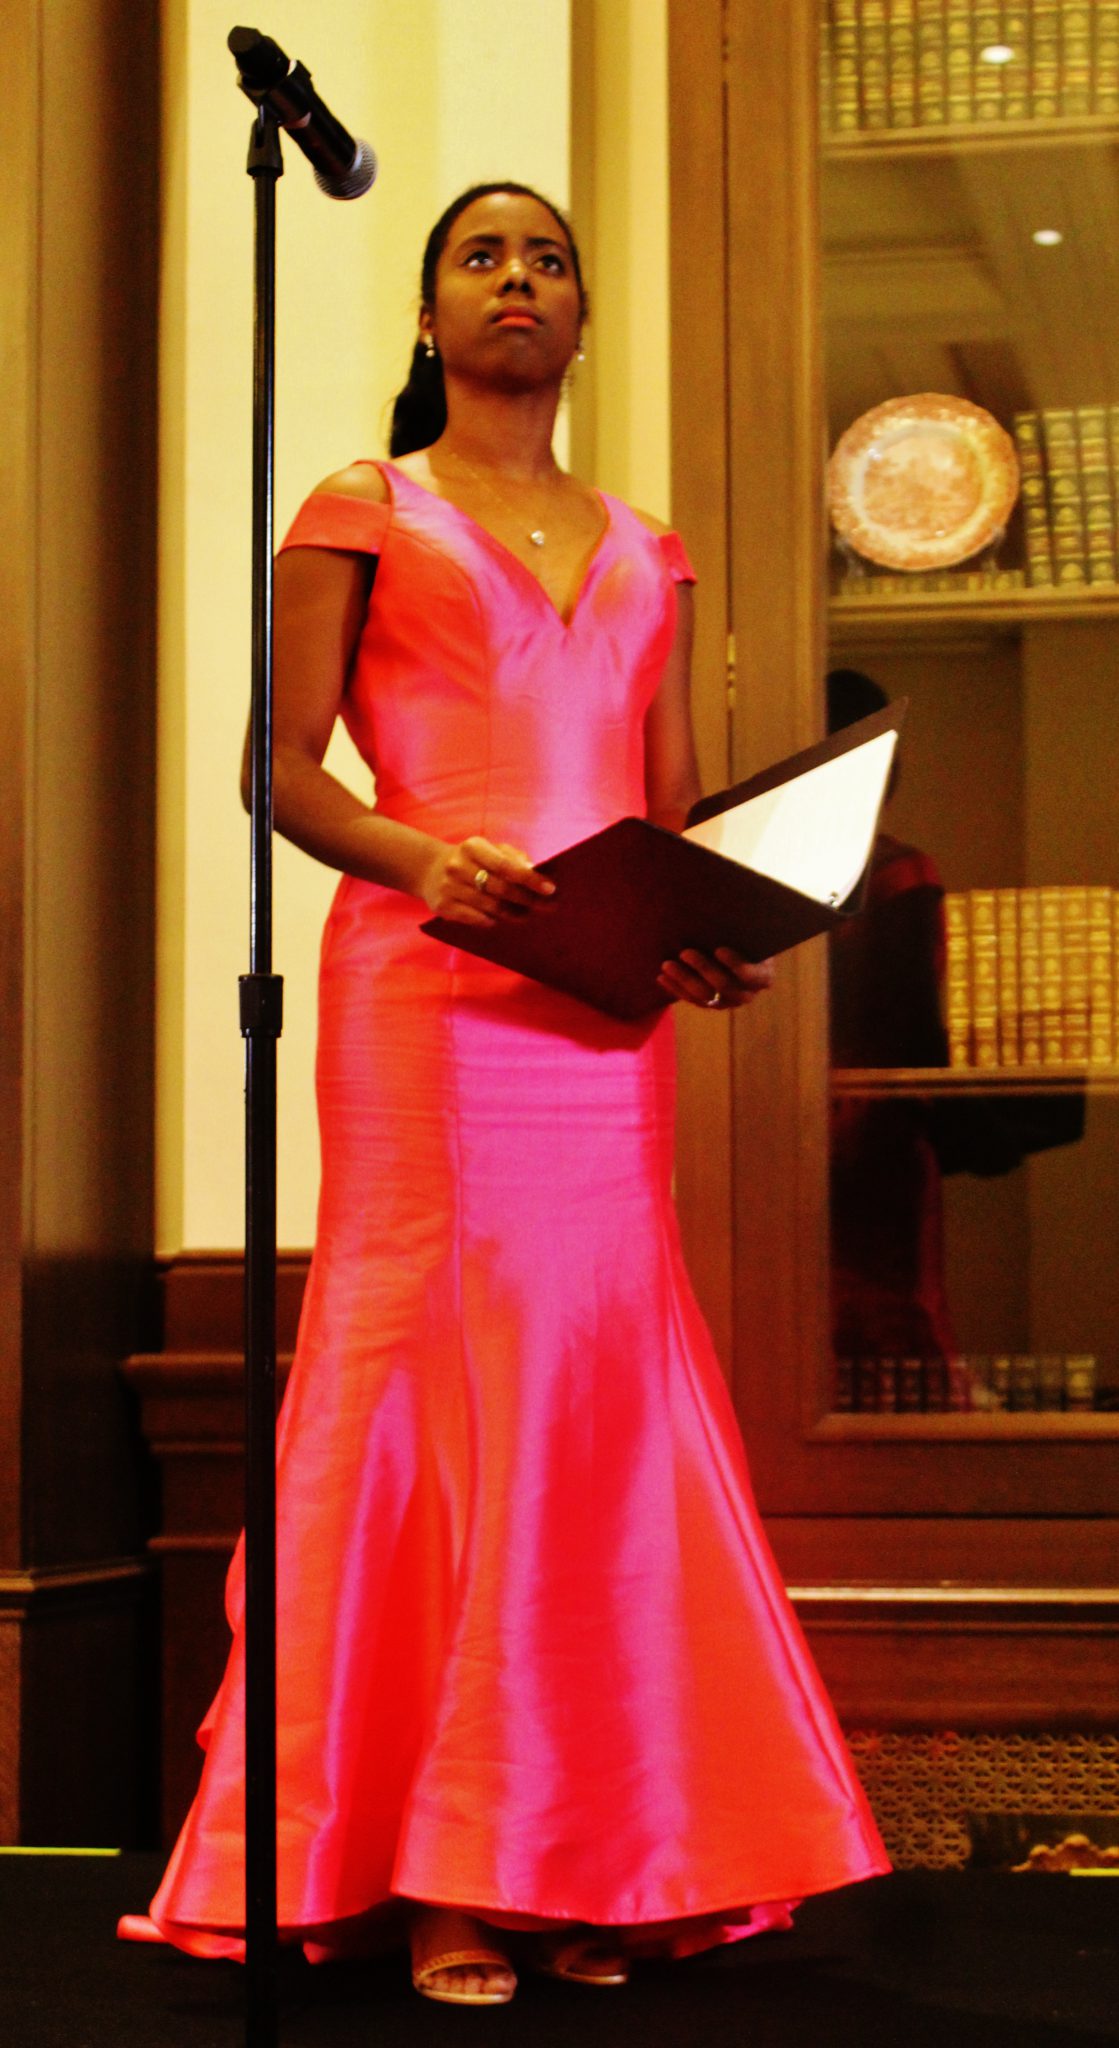 Kyaunnee Richardson in the lead role as Esther brought the commanding presence of royalty and glamour to the Trump International Hotel